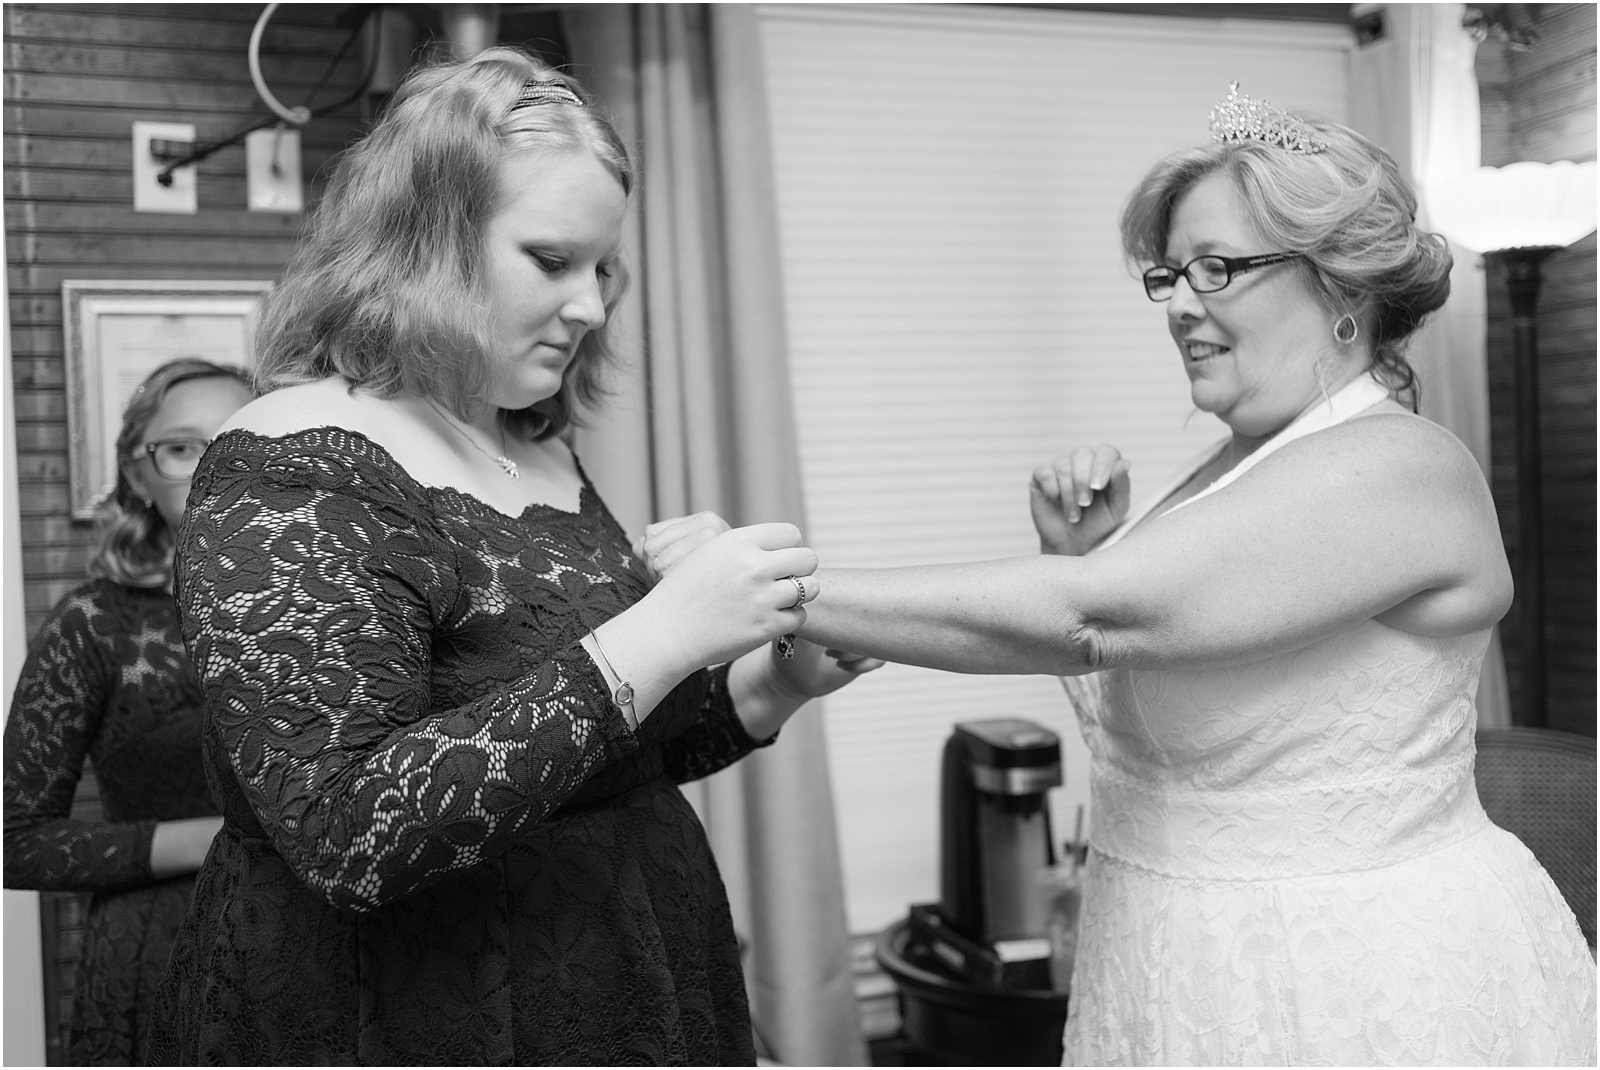 Michelle and Sara Photography, Michelle and Sara weddings, michelle robinson photography, burke manor inn, getting ready, bride putting on jewerly